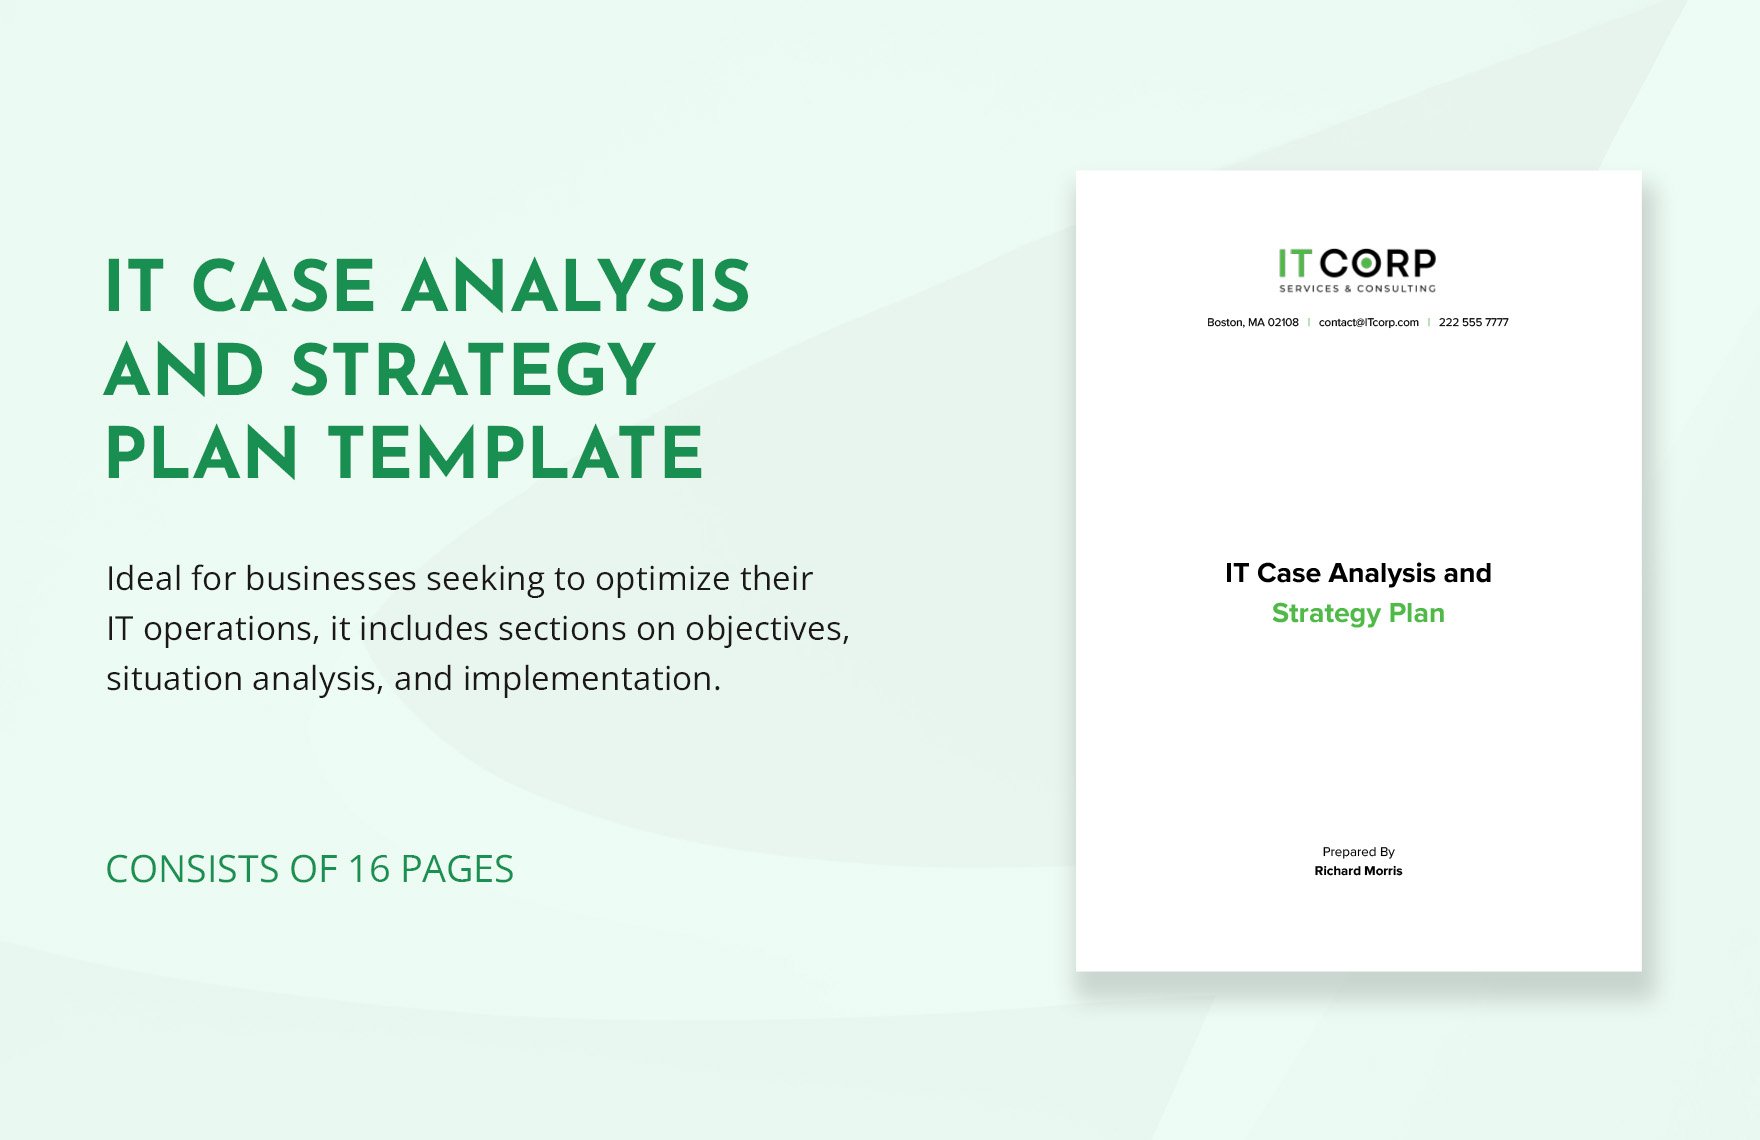 IT Case Analysis and Strategy Plan Template